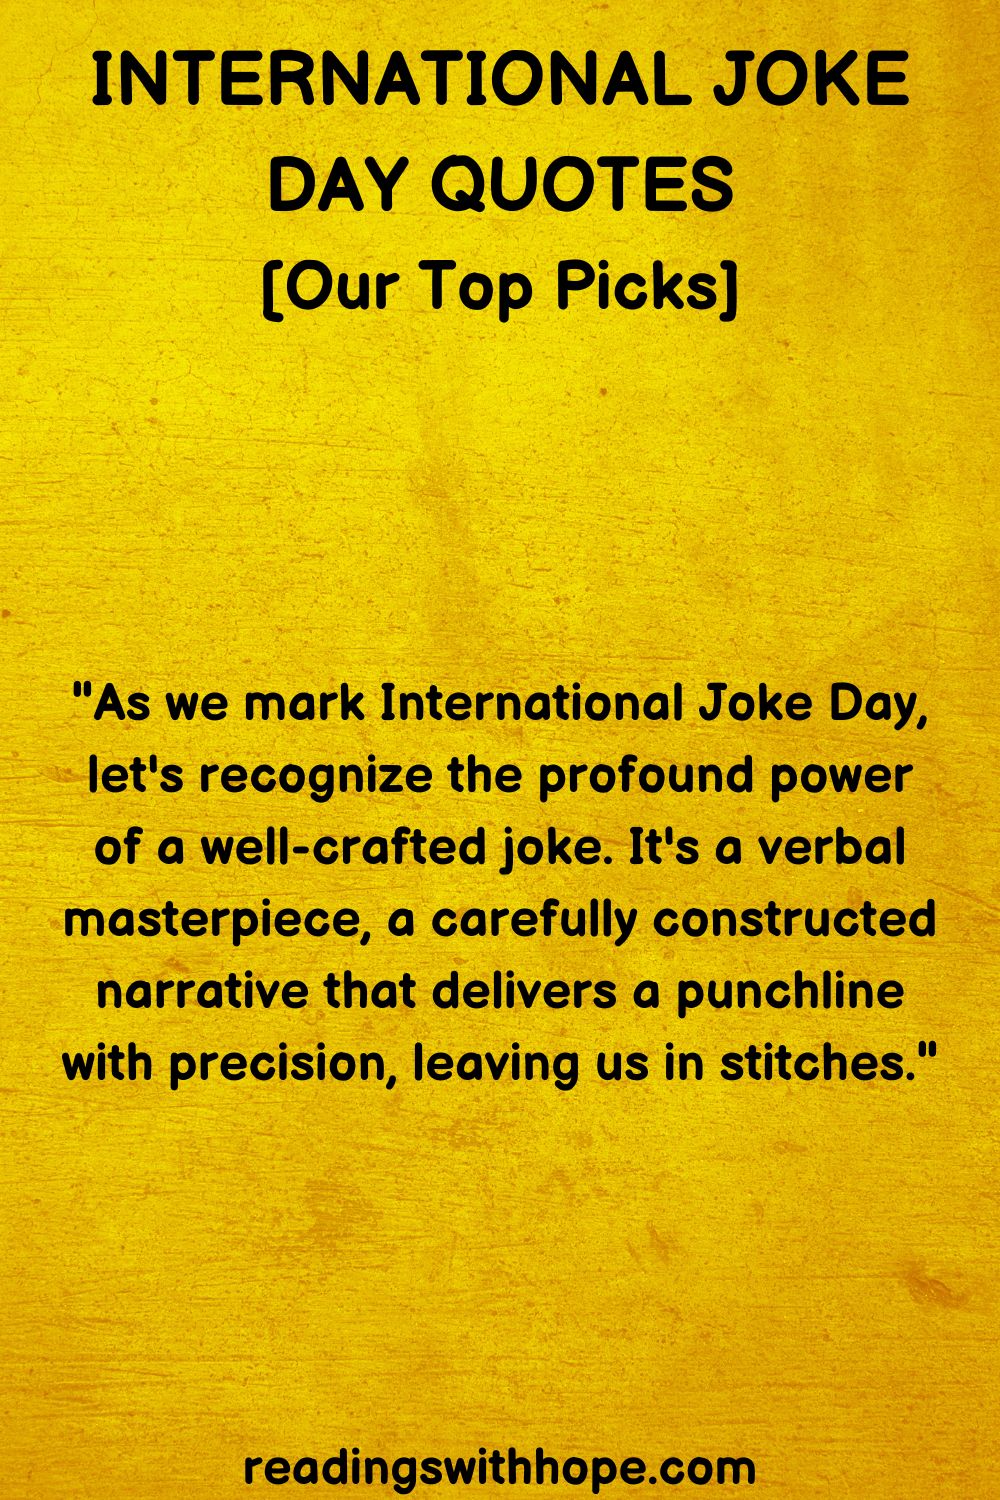 32 International Joke Day Quotes and Messages